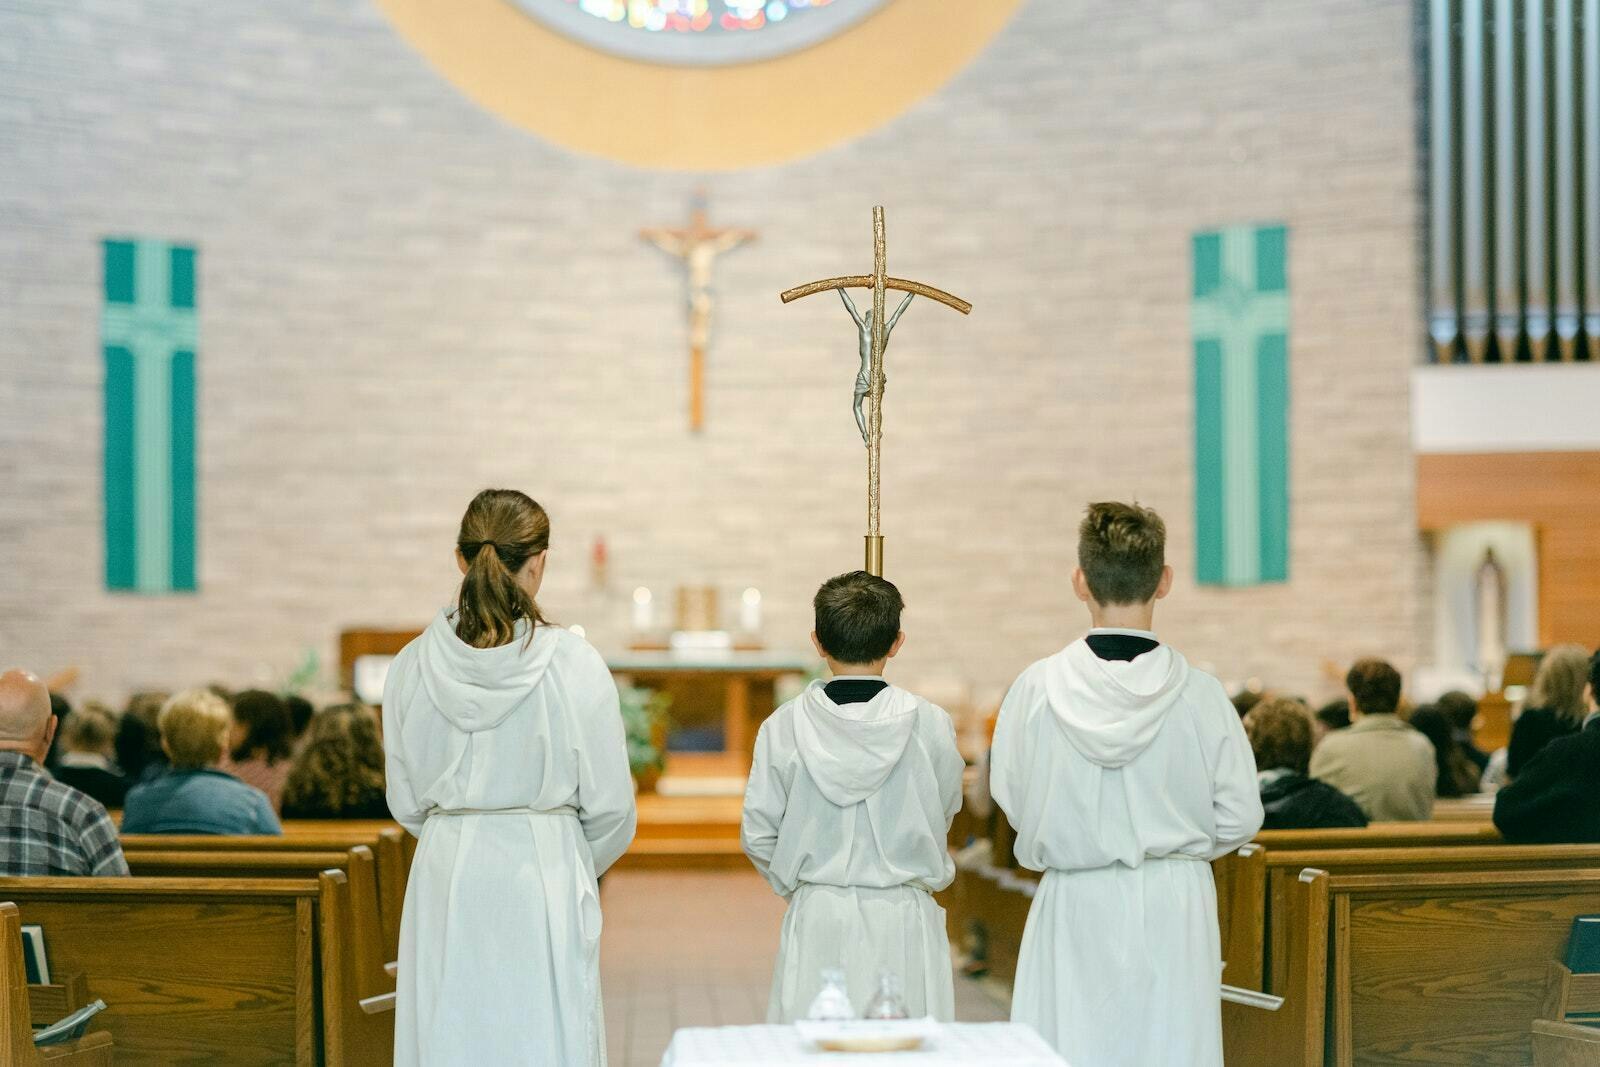 Students prepare to serve as altar servers during an all-school Mass at Our Lady of the Lakes Parish in Waterford. The school has reported an enrollment increase for the 2023-24 academic year.